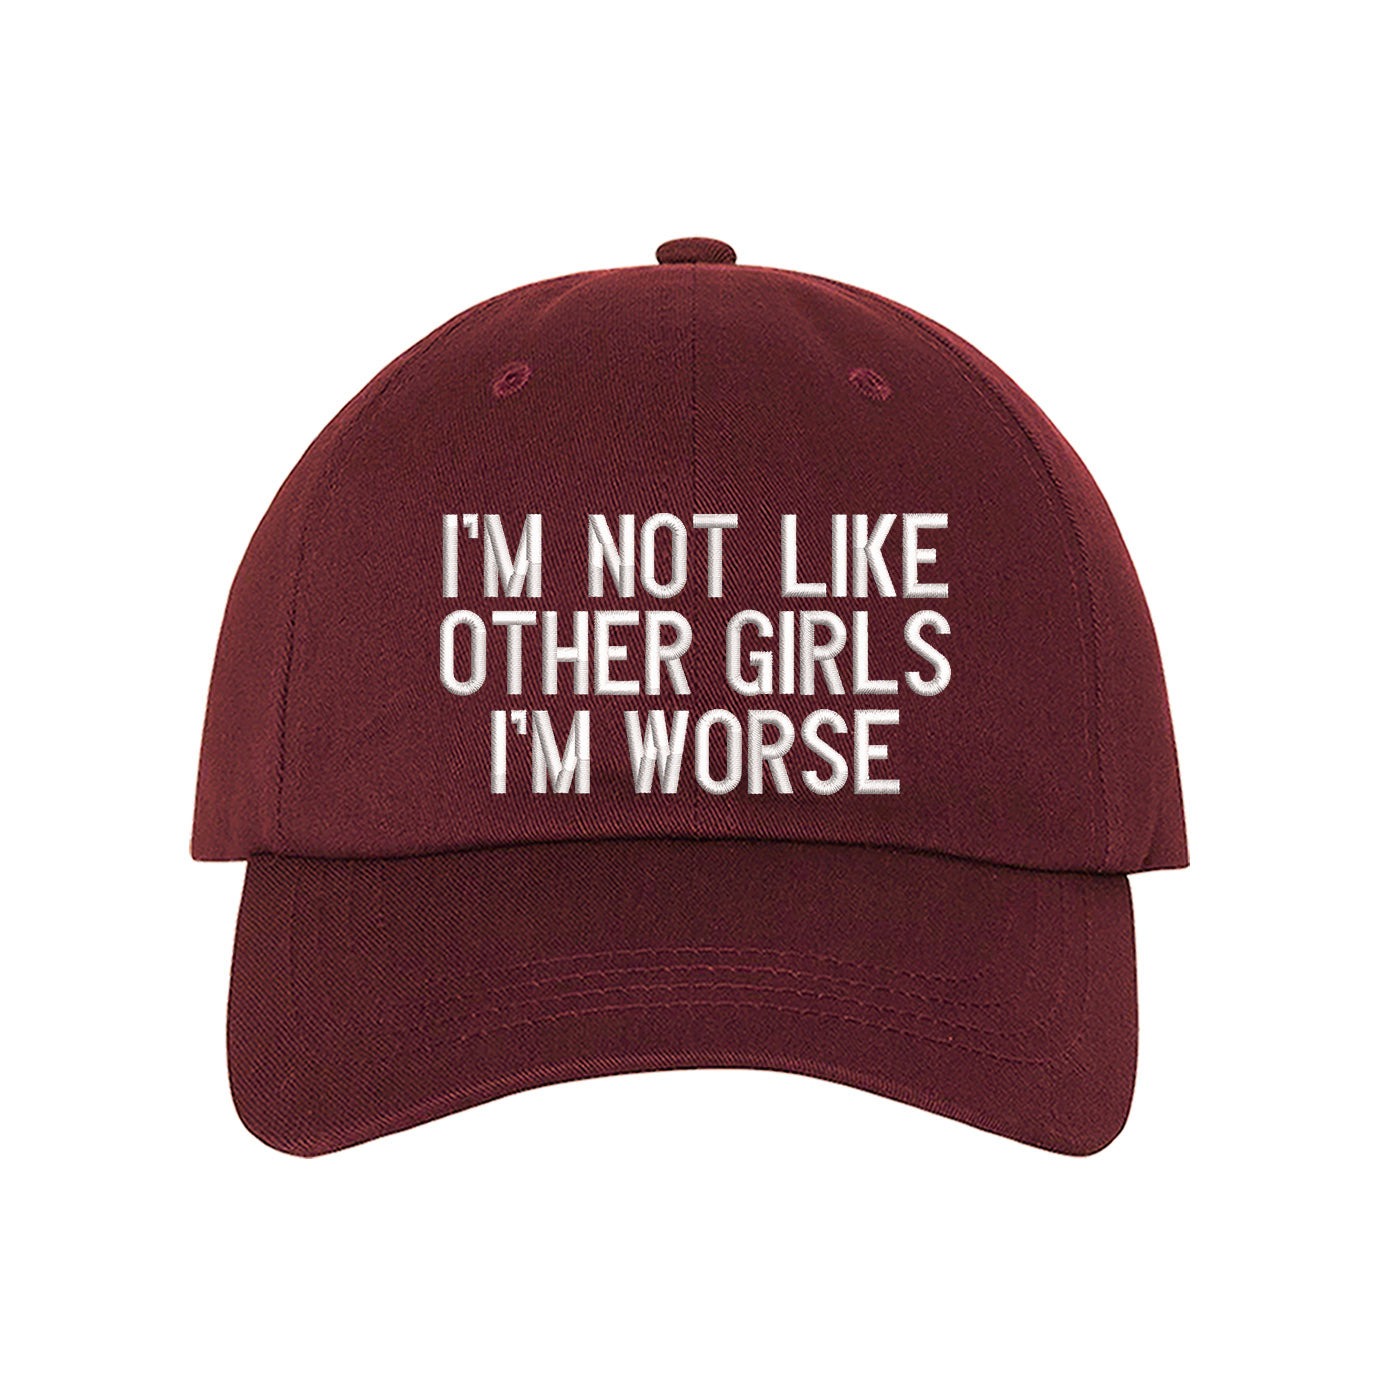 Burgundy baseball hat embroidered with the phrase im not like other girls im worse- DSY Lifestyle